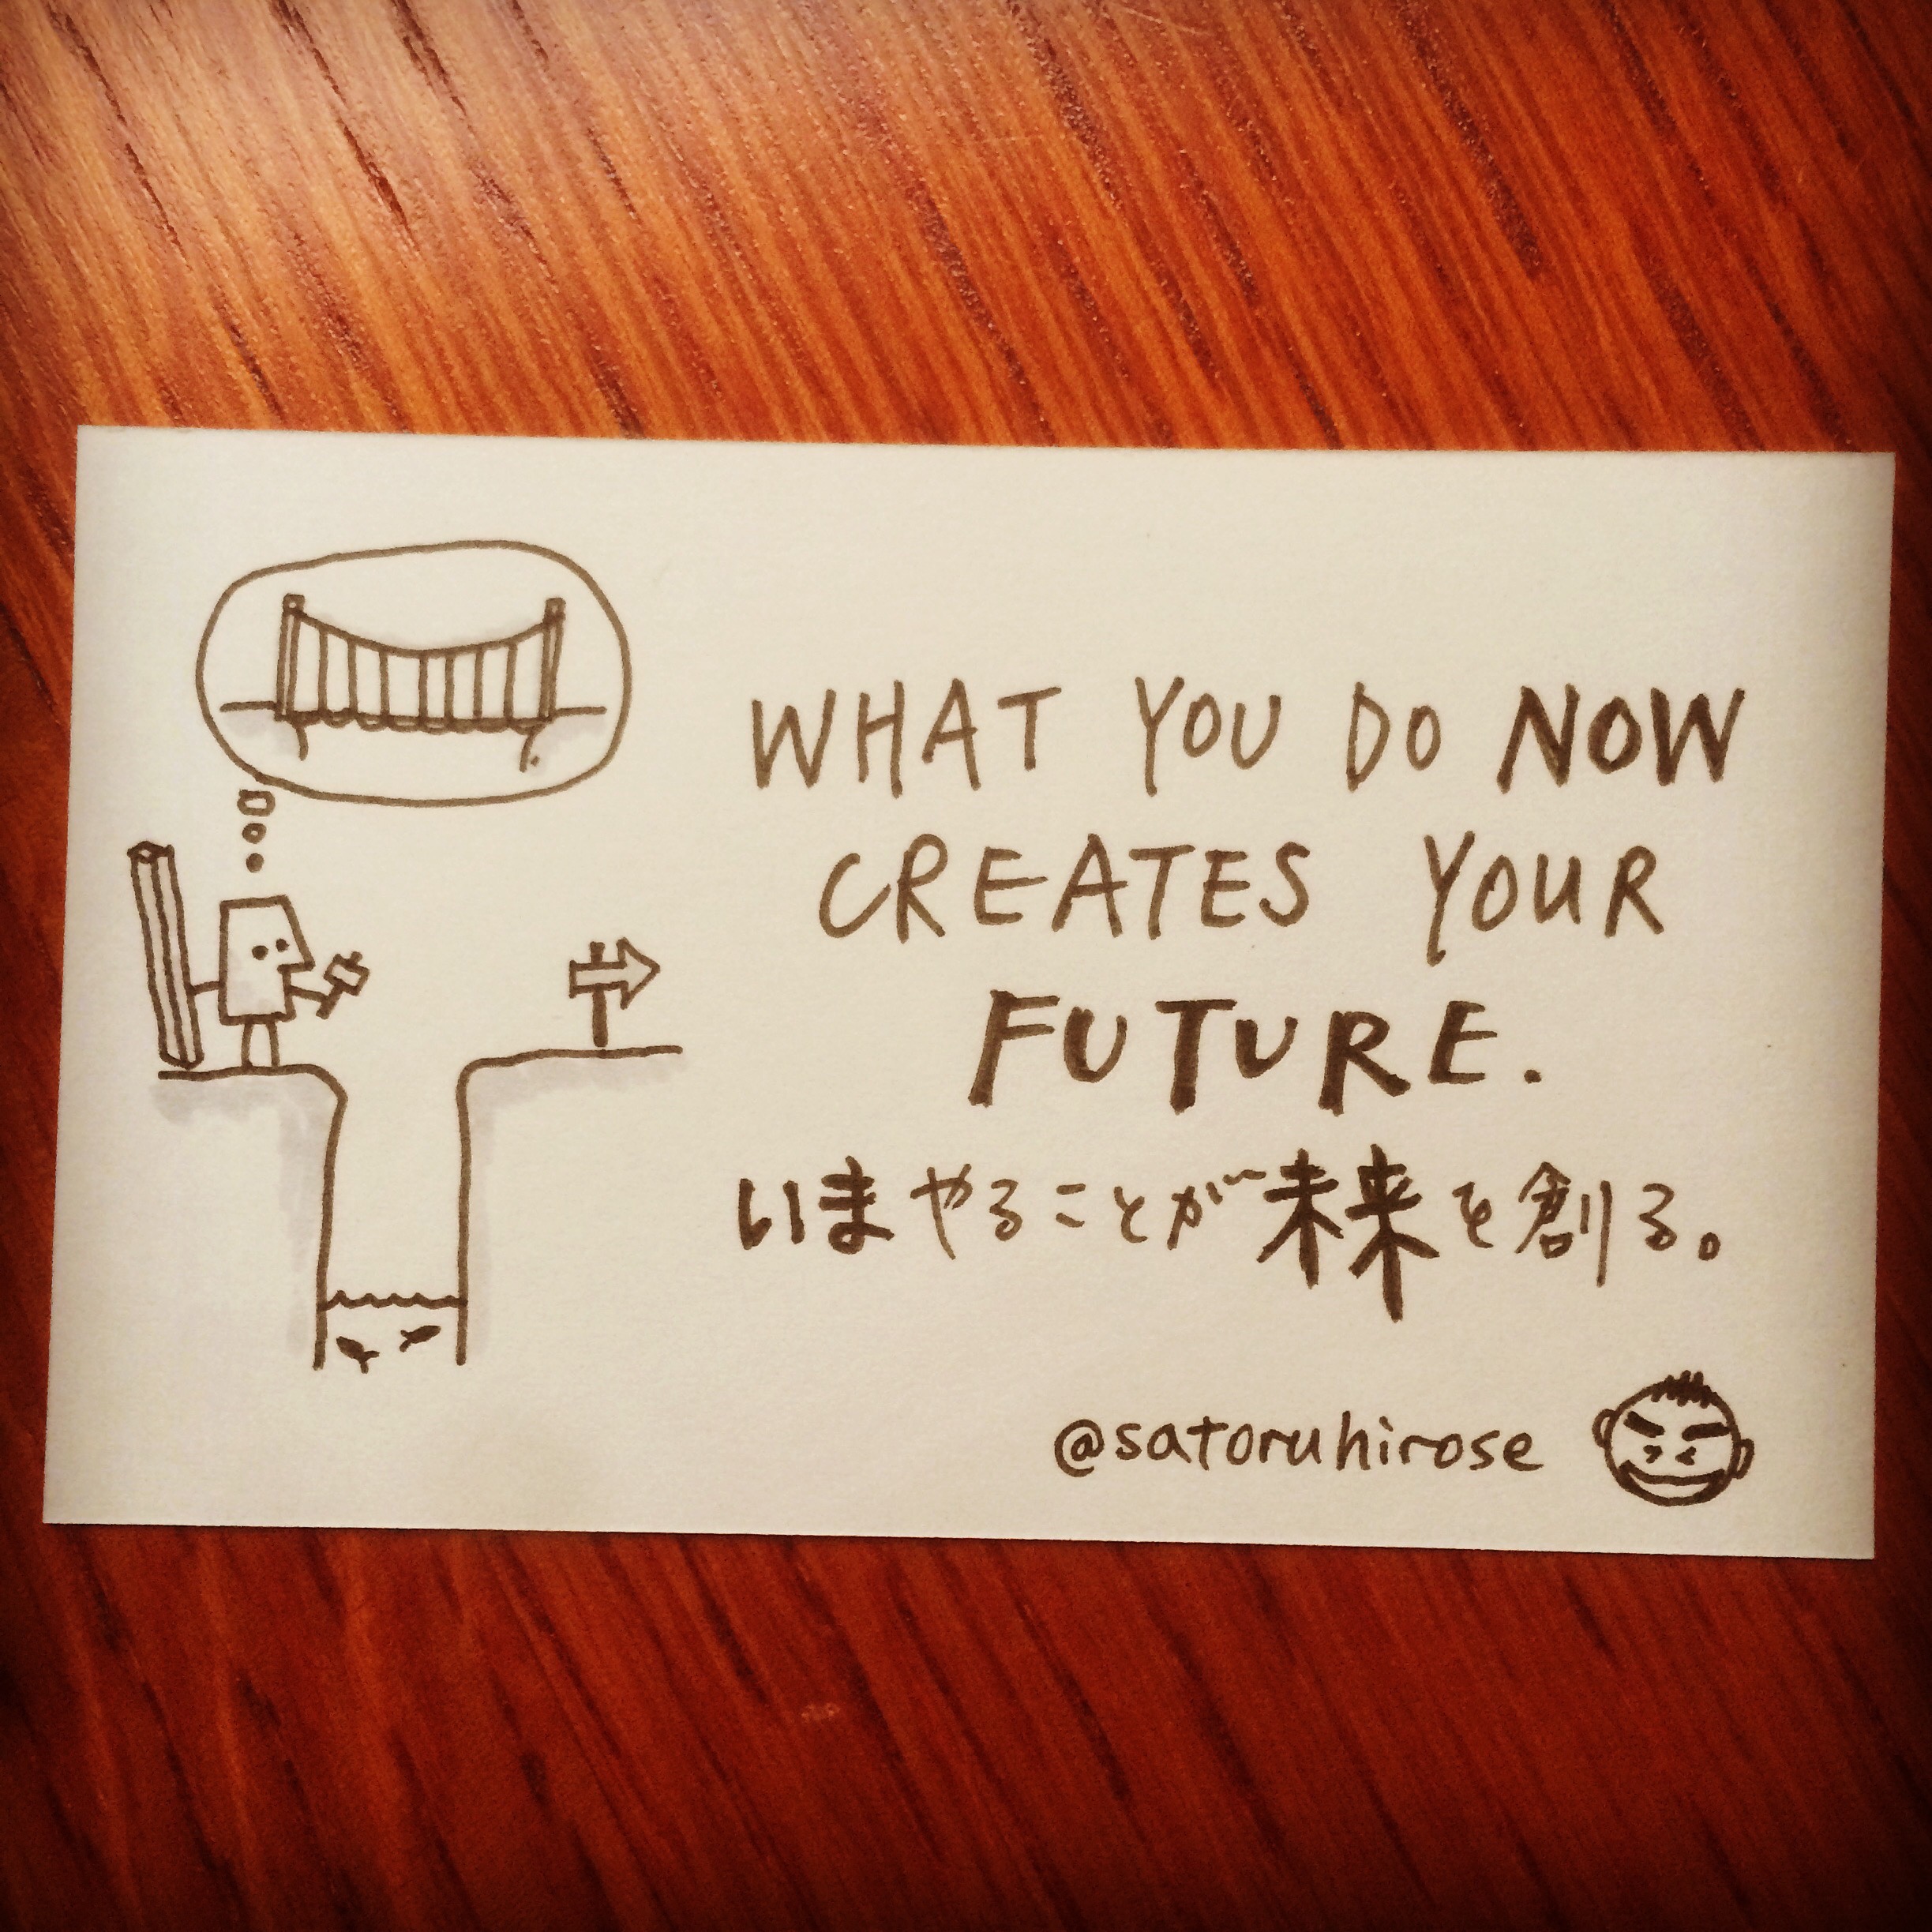 What you do now creates your future.